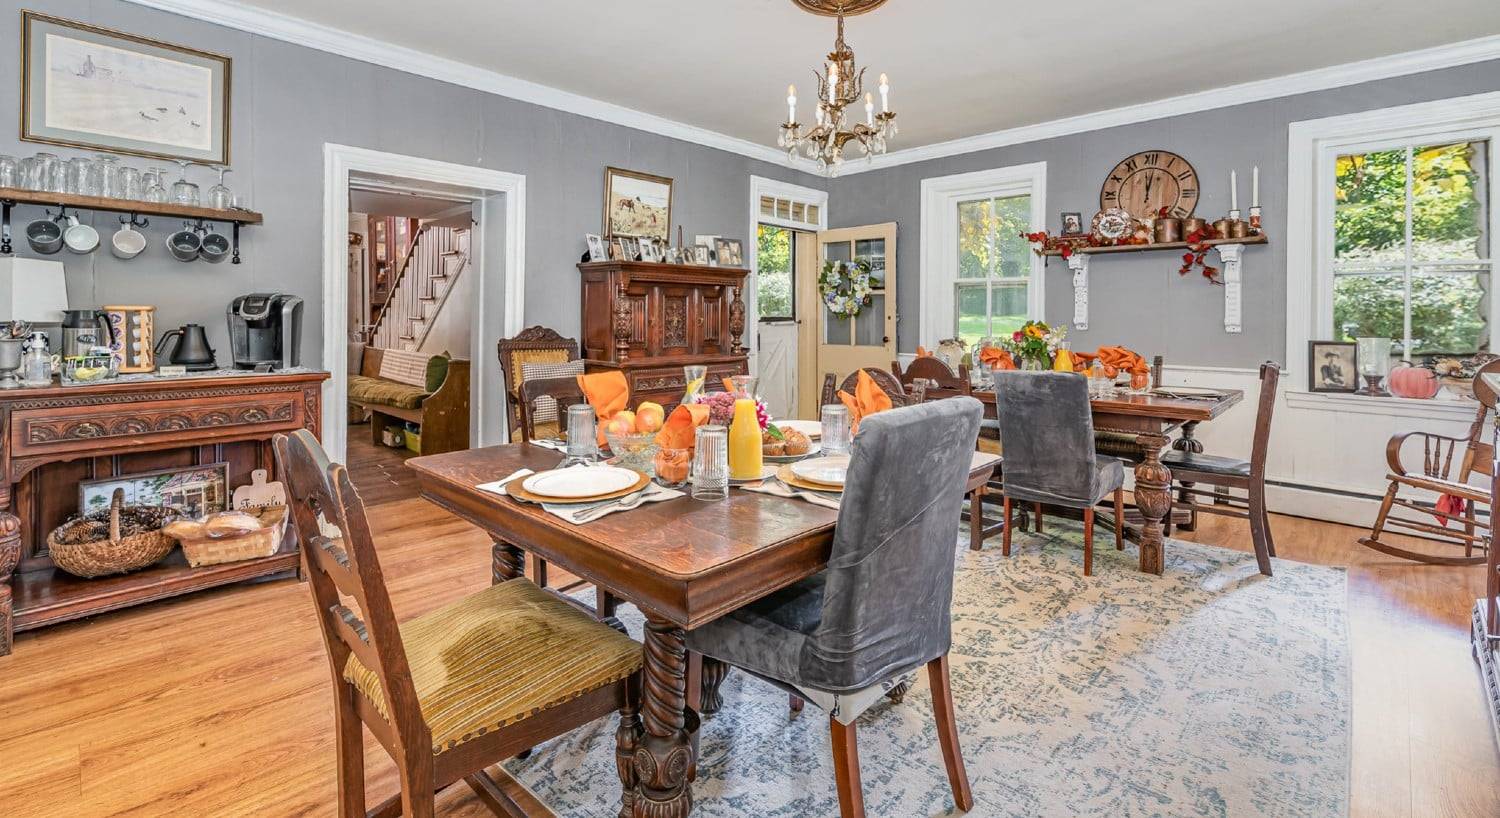 Dining room of an elegant home with two tables set for four, a coffee station and various antique pieces